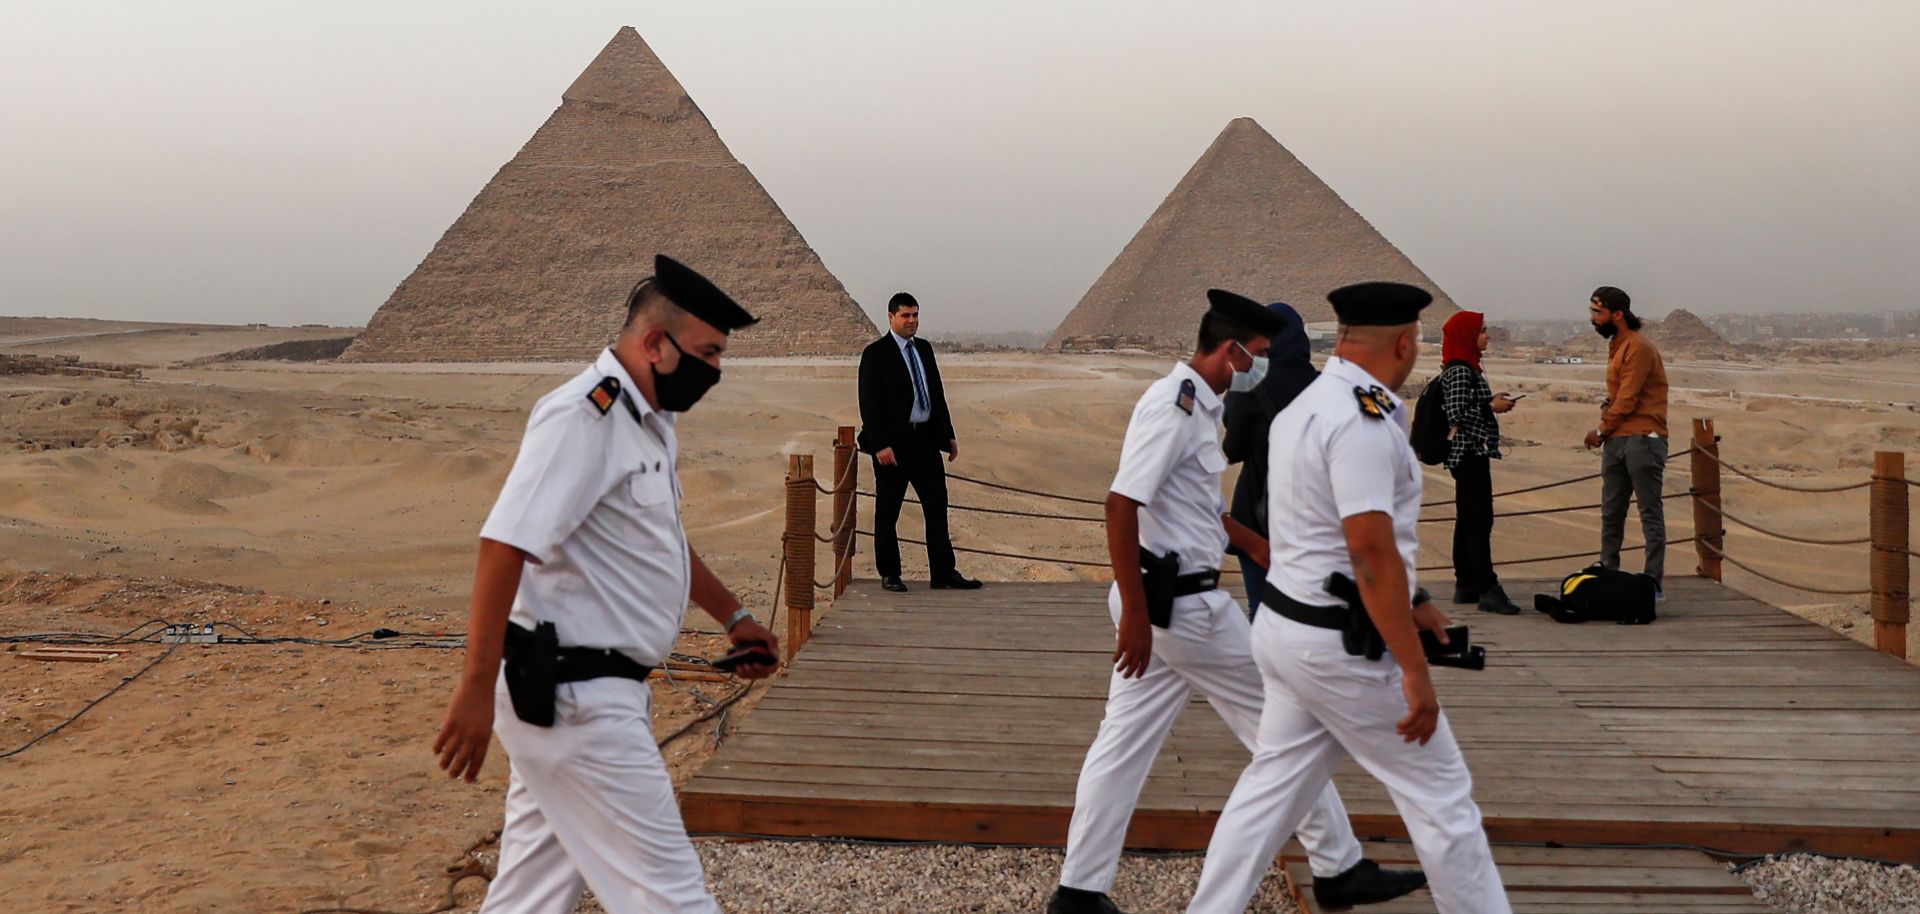 Policemen walk near an overlook at the Giza Pyramids in Egypt ahead of a ceremony commemorating the launch of the site's first environmentally-friendly bus and restaurant on Oct. 20, 2020. 